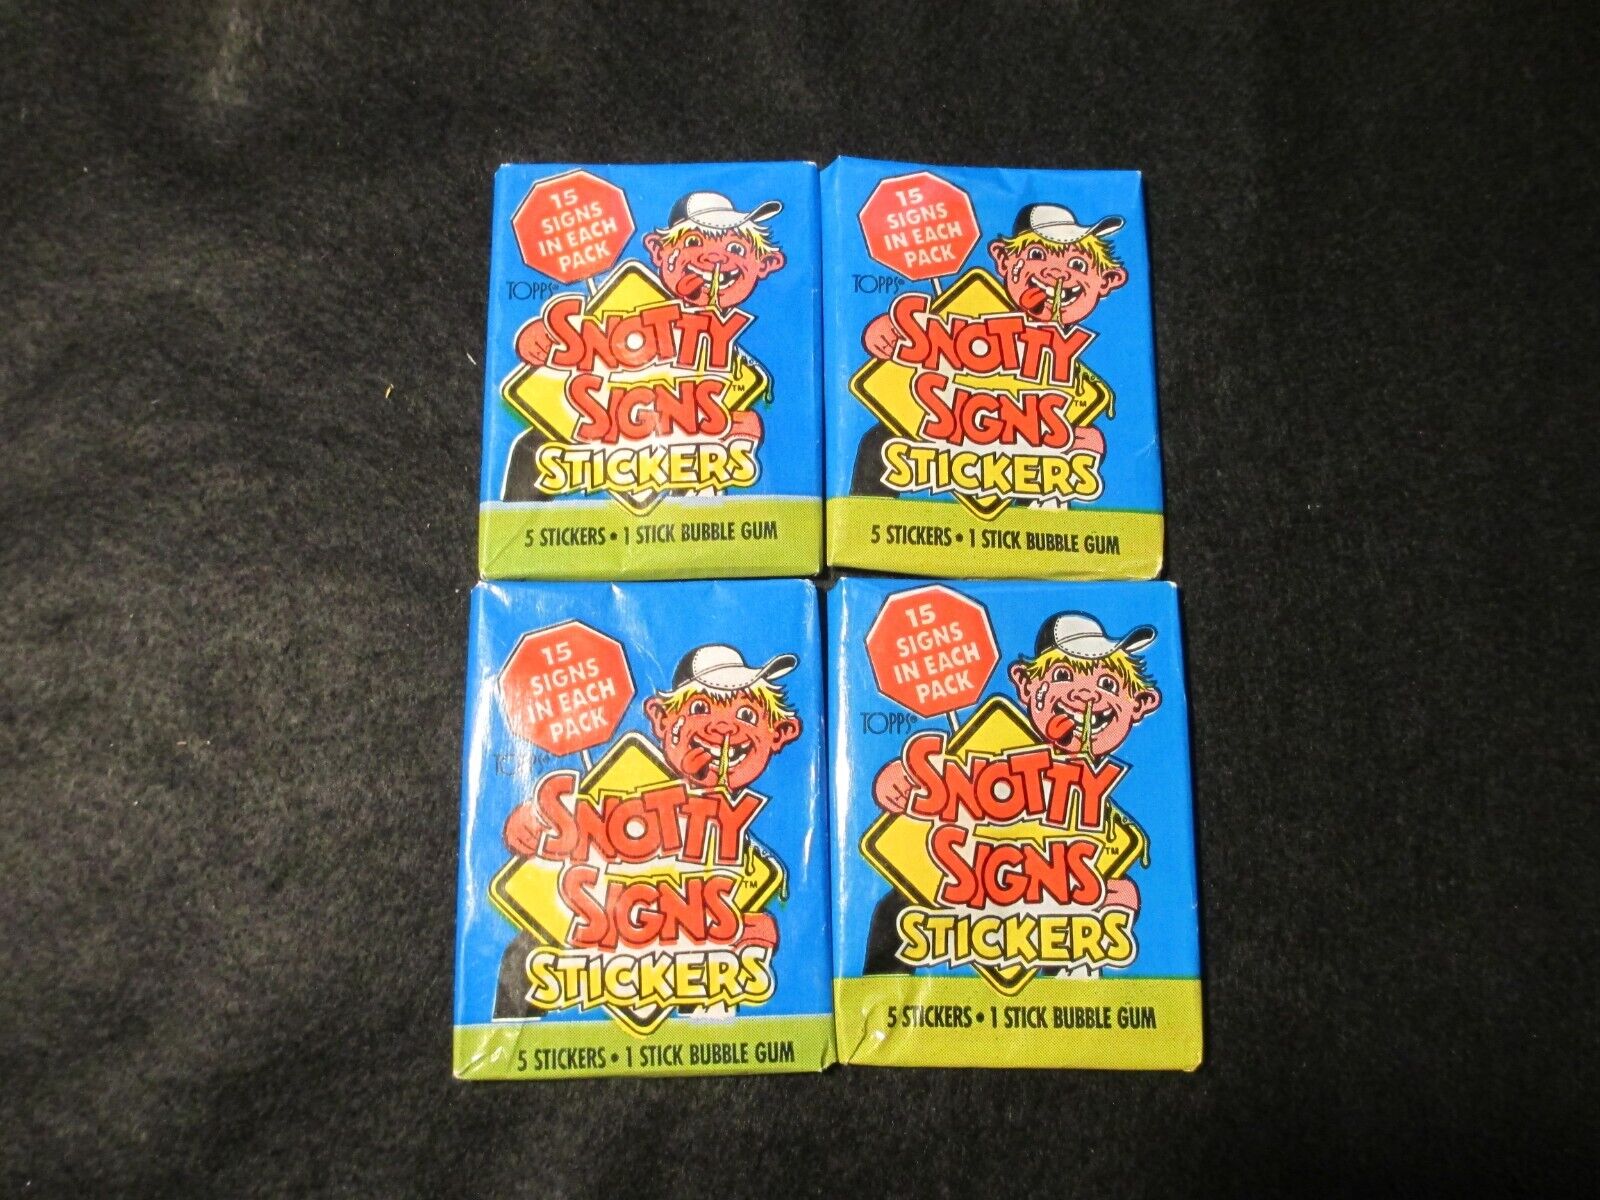 1986 Unopened Topps Snotty Signs Sticker Lot of 4 